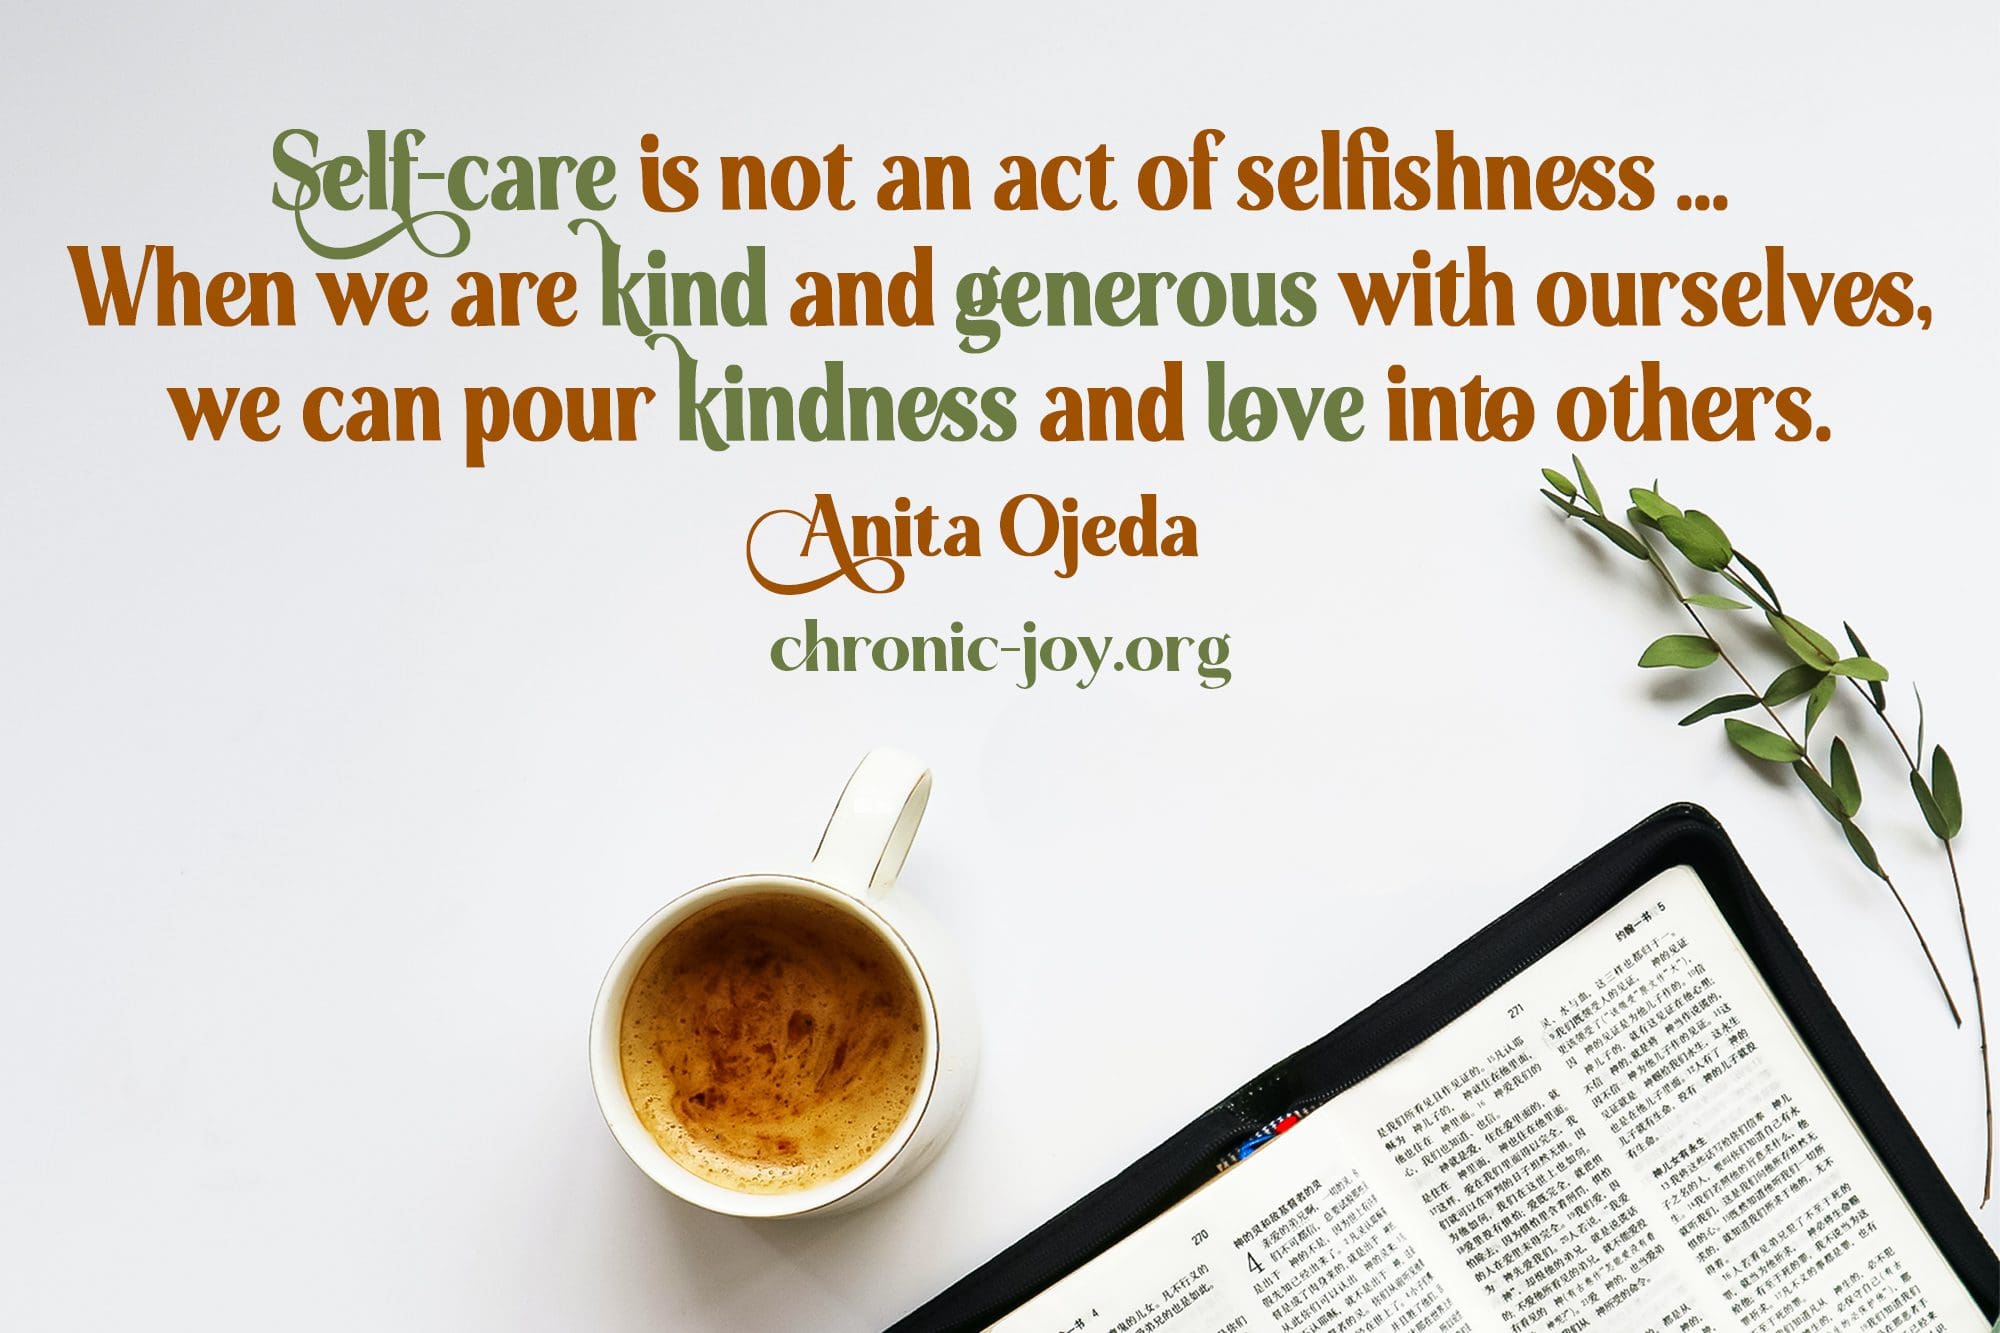 "Self-care is not an act of selfishness ... When we are kind and generous with ourselves, we can pour kindness and love into others." Anita Ojeda